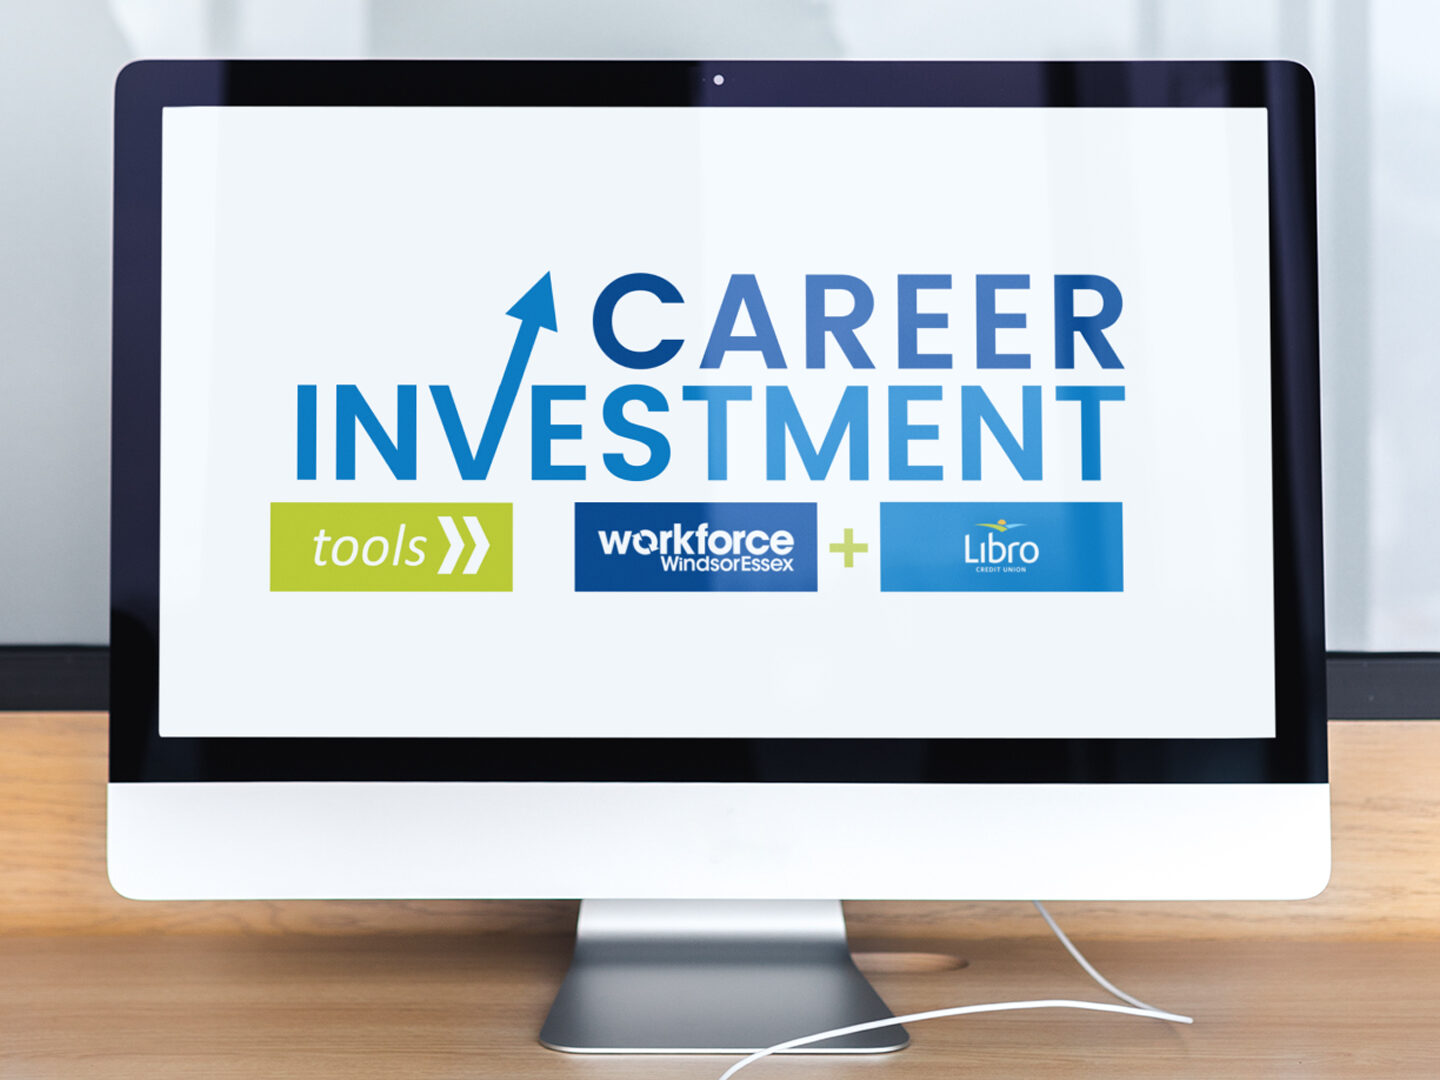 Libro Career Investment Tools shown on computer monitor